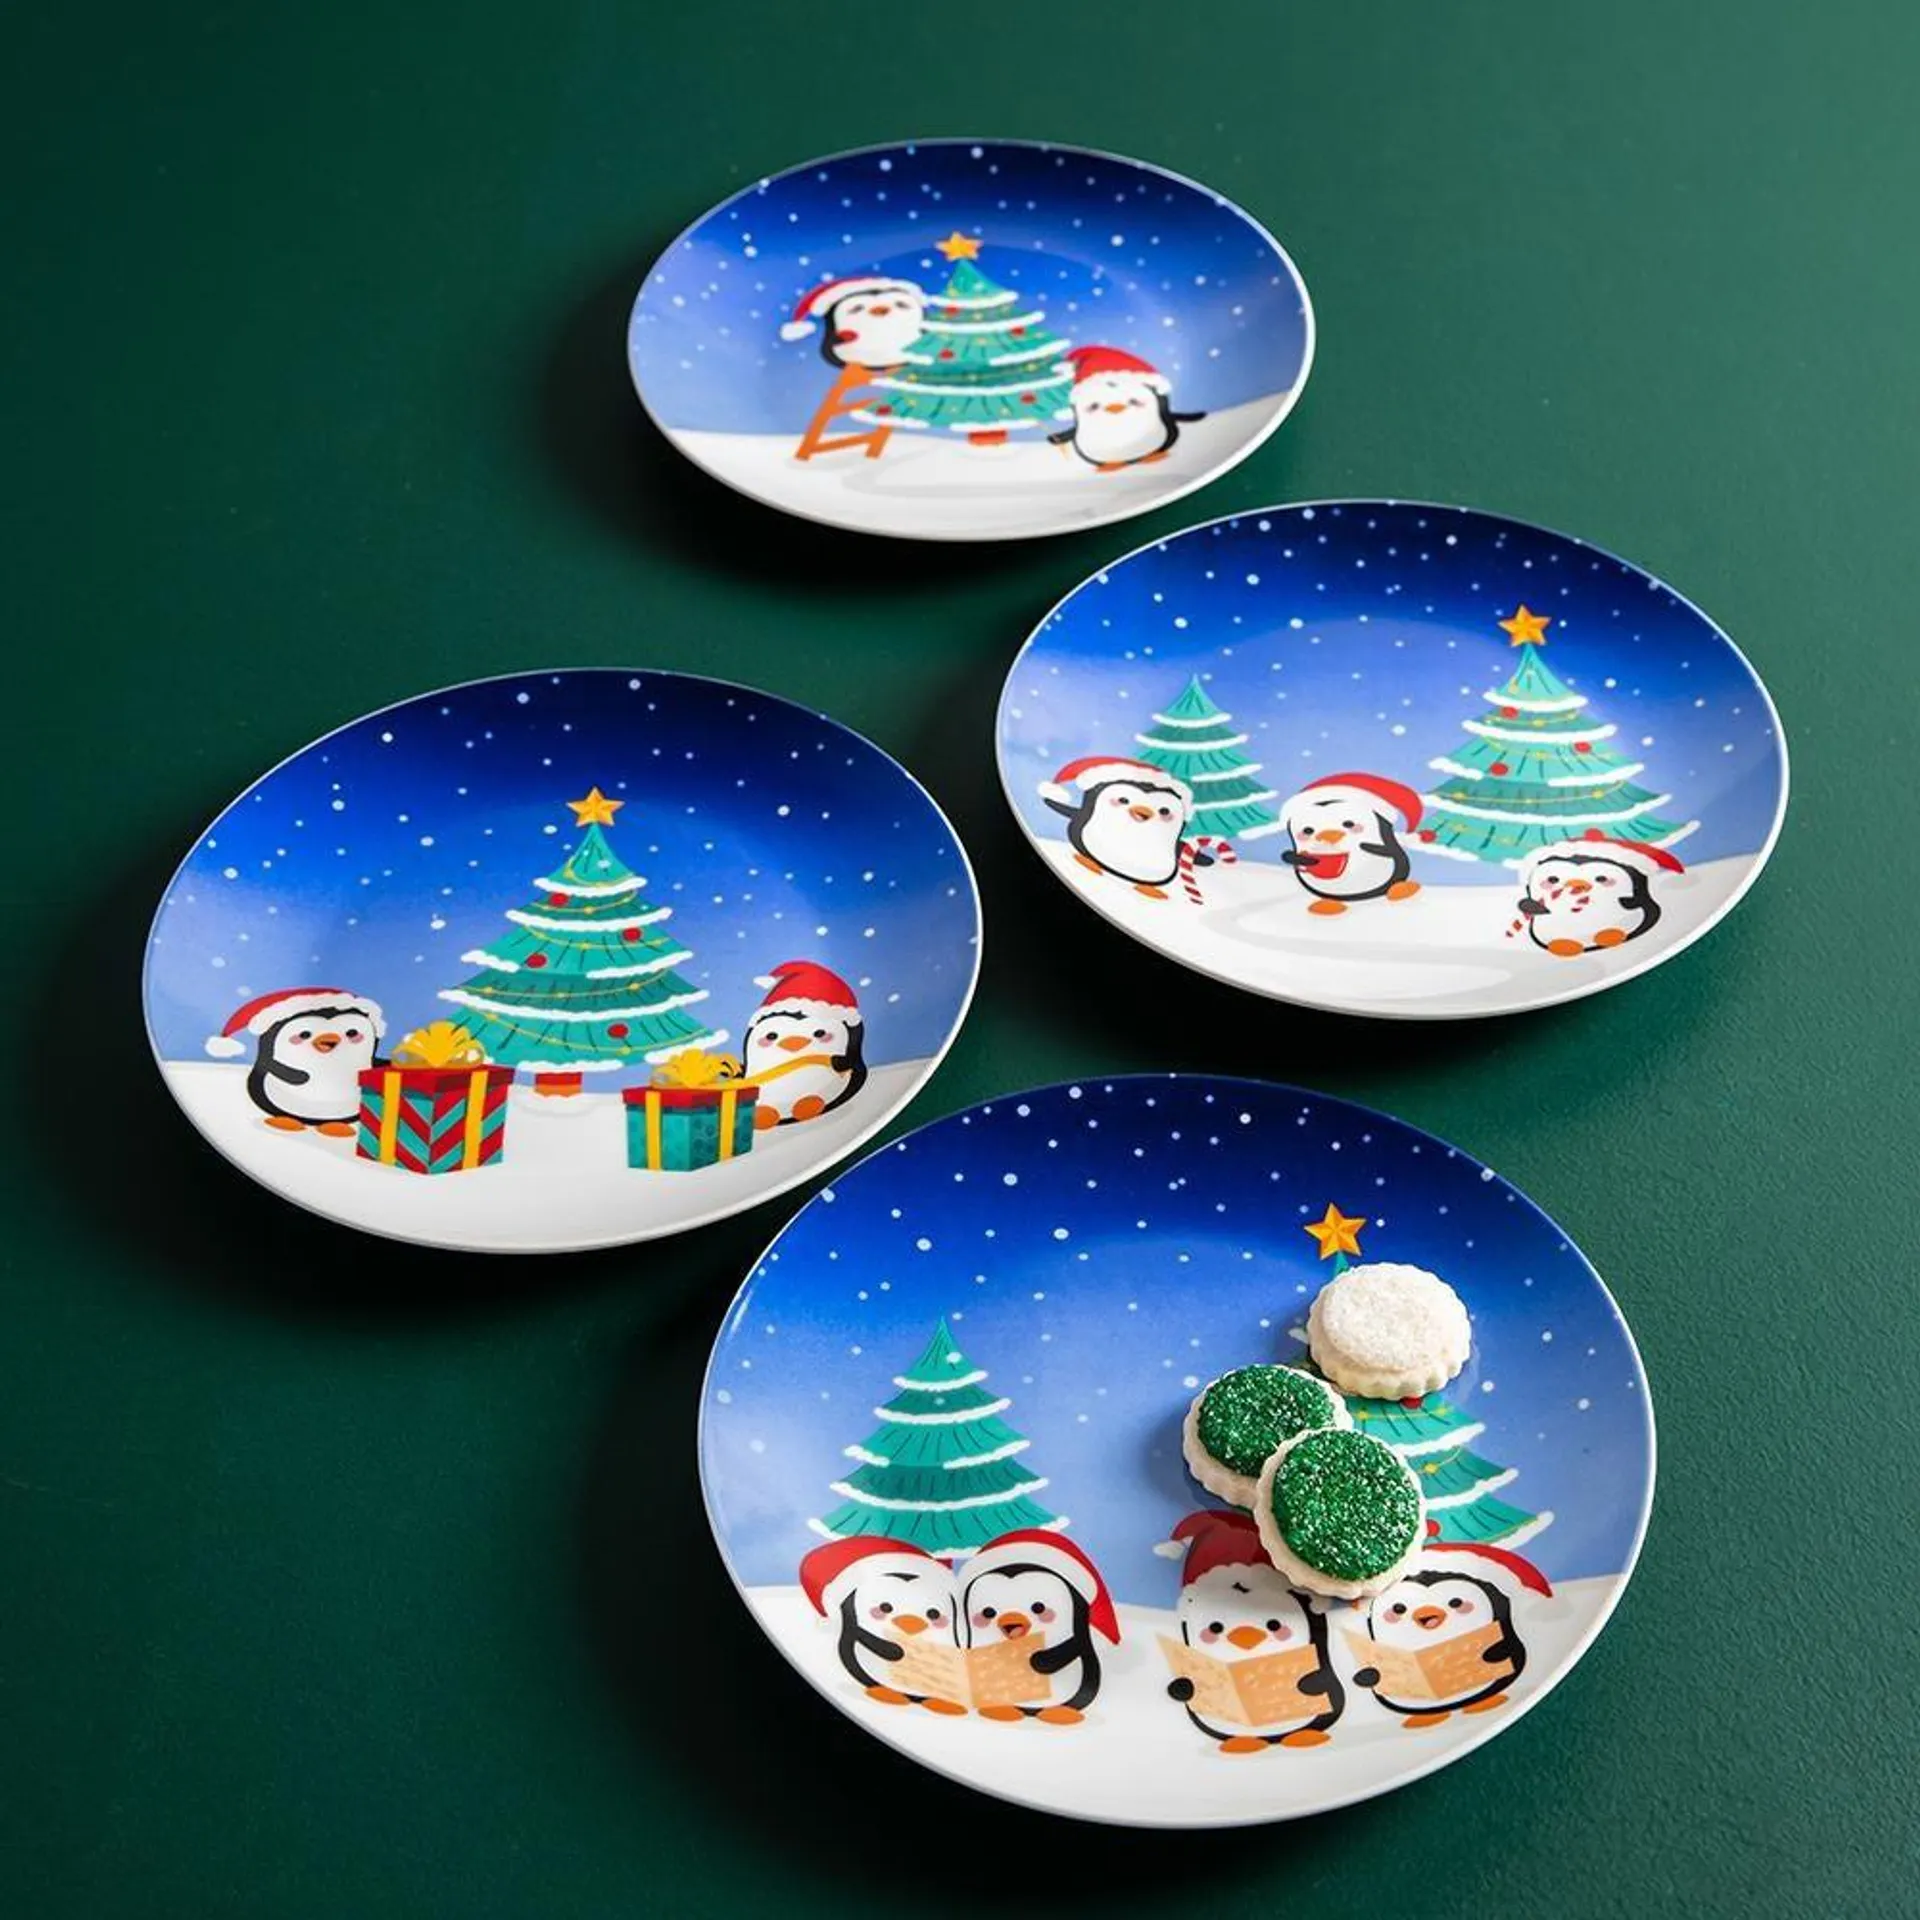 KSP Christmas Decal 'Holiday Cuties' Porcelain Side Plate - Set of 4